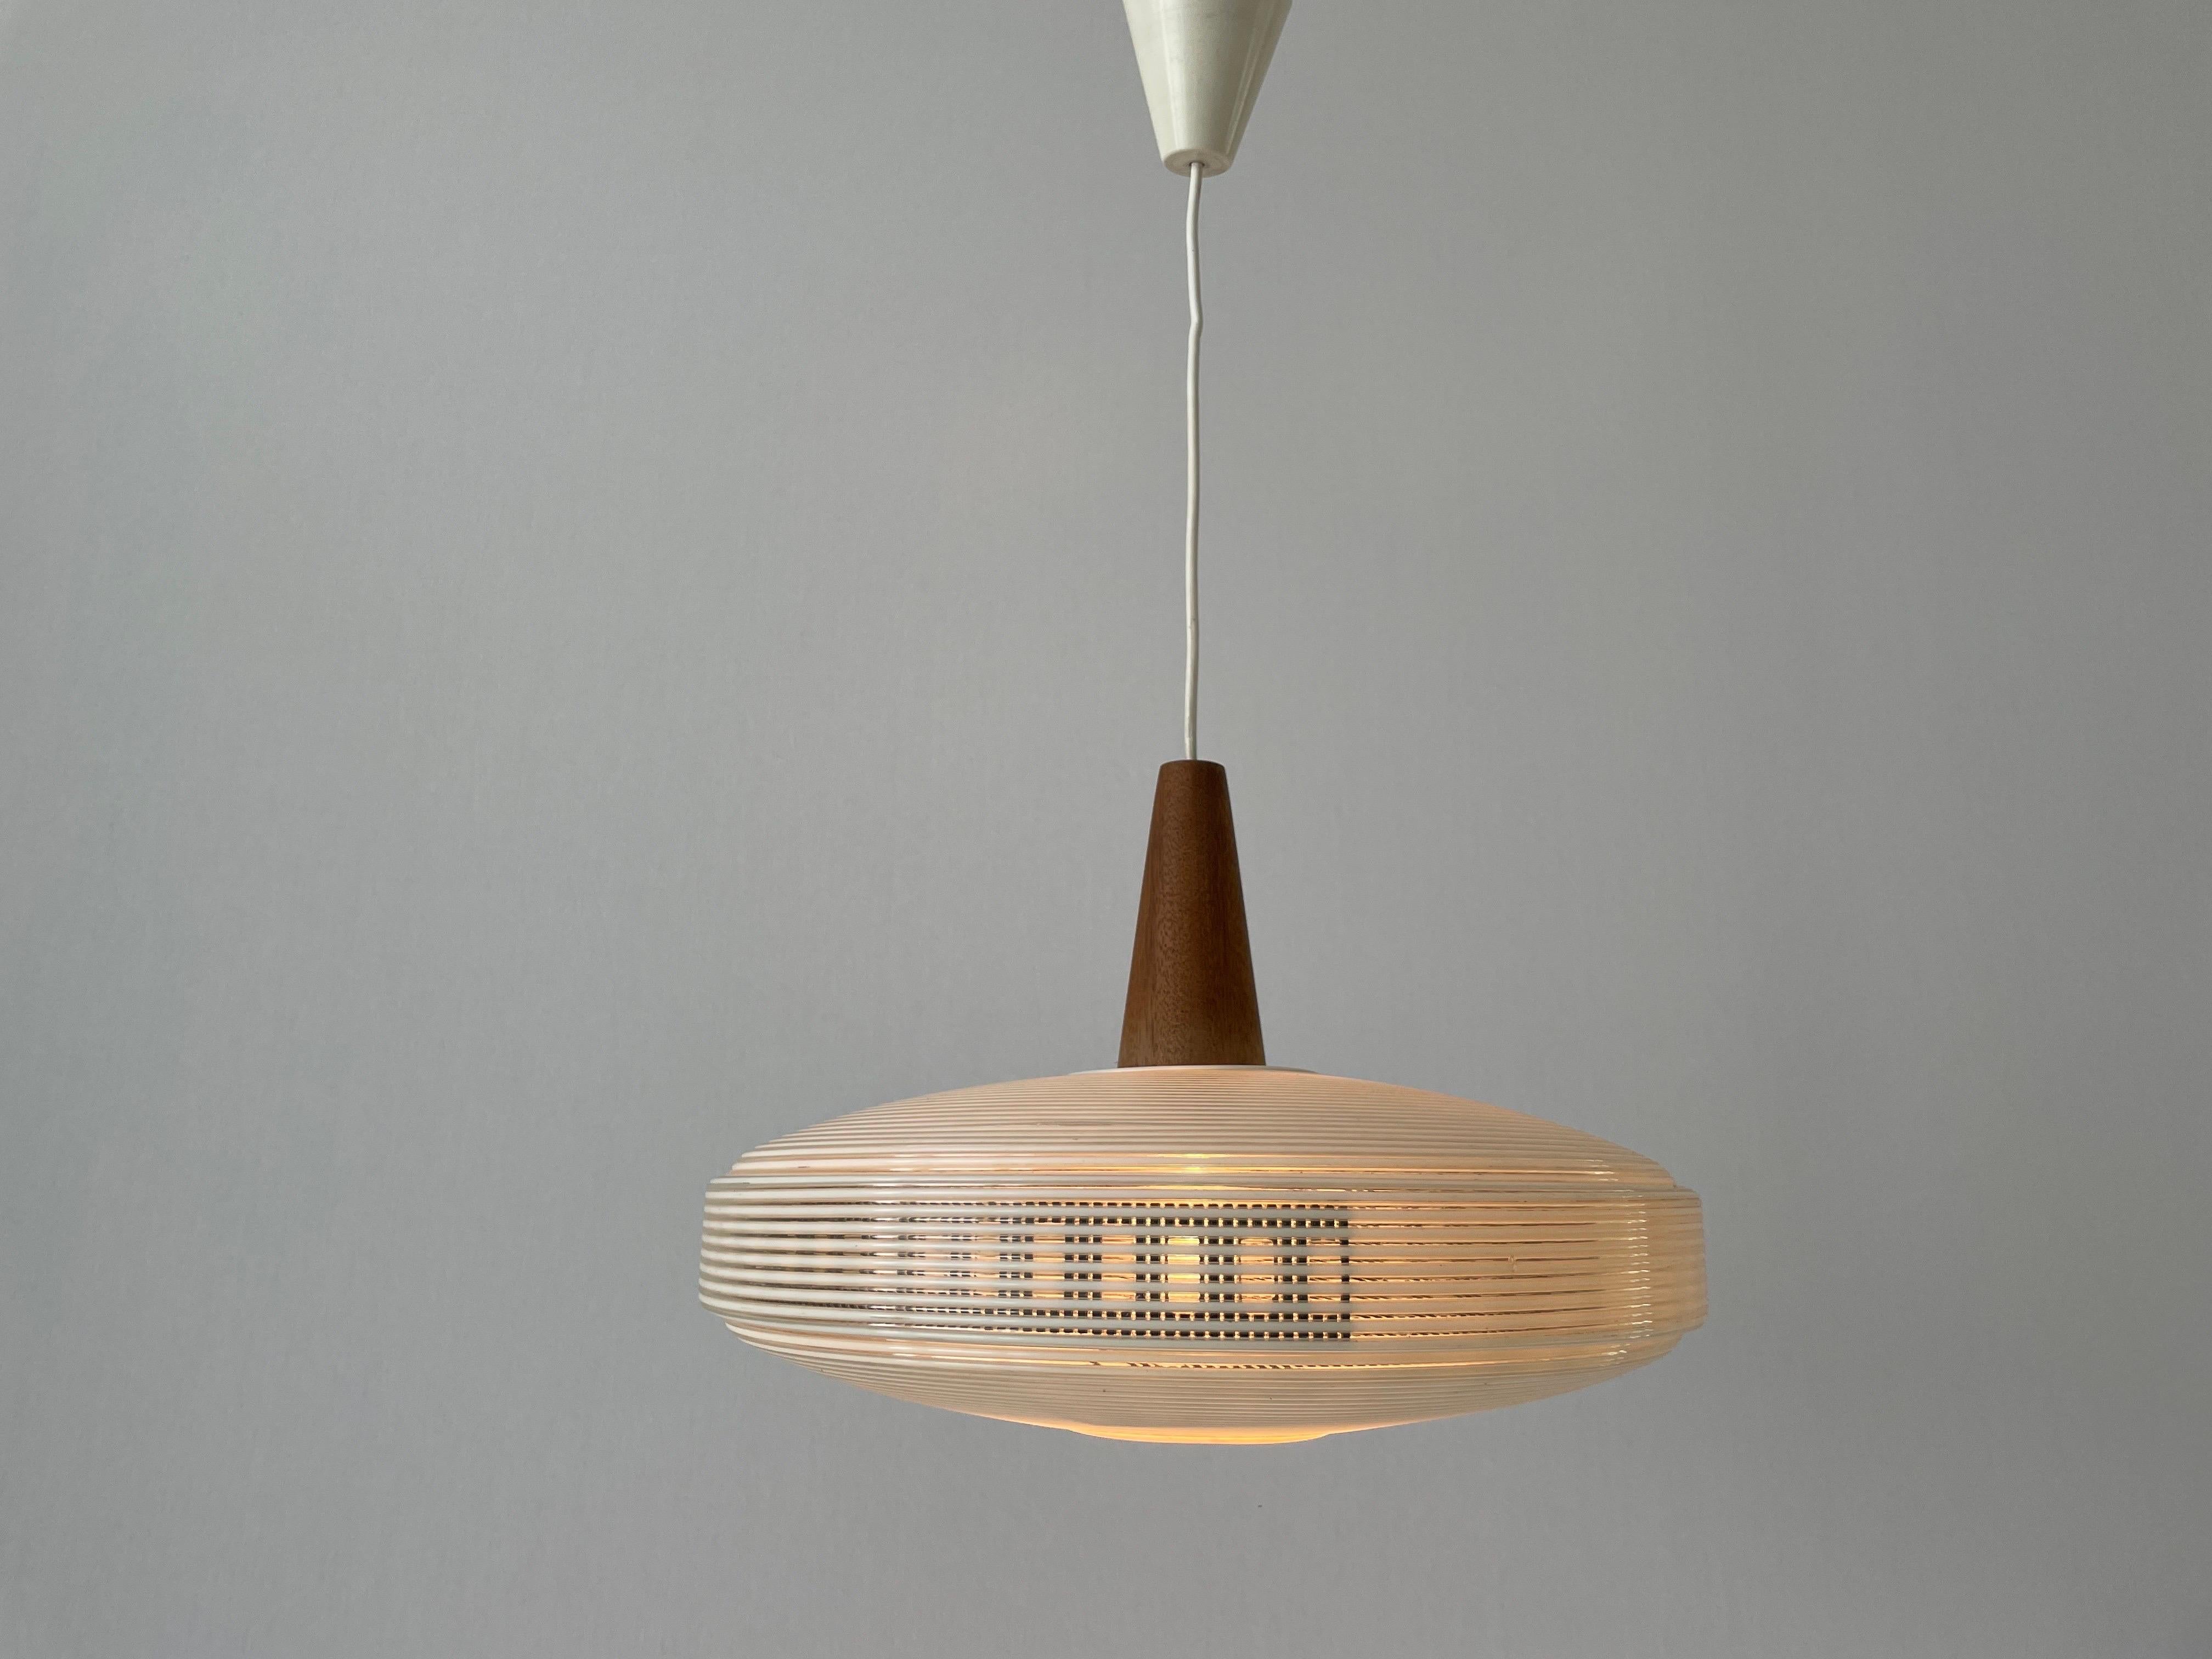 Rare Rotaflex Ceiling Lamp by Yasha Heifetz with Teak Detail, 1960s Germany For Sale 1